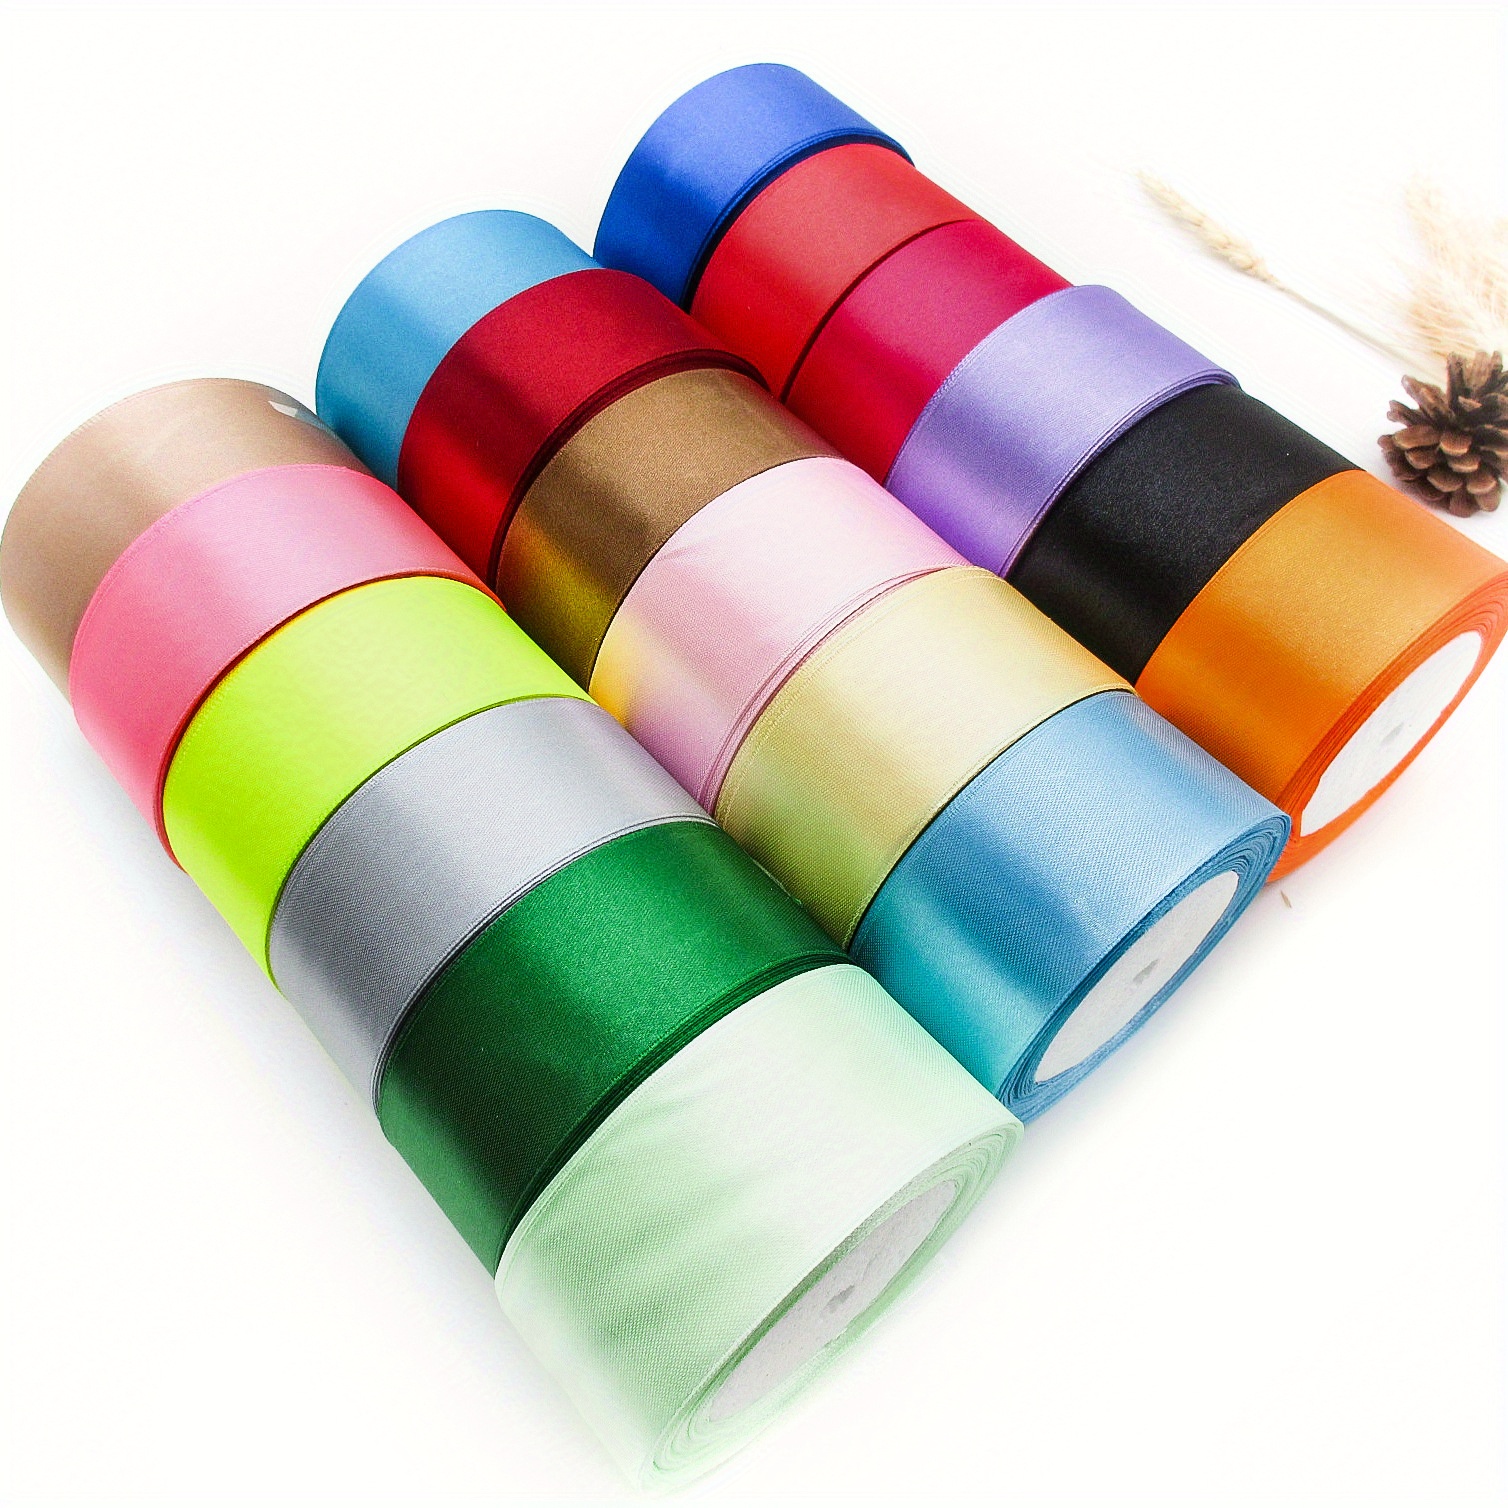 

1 Roll 25 Yards Colored Satin Ribbon, Ribbon Decoration For Gift Wrapping, Wedding Party Decoration, Diy Hair Bows, Decorative Supplies & Accessories